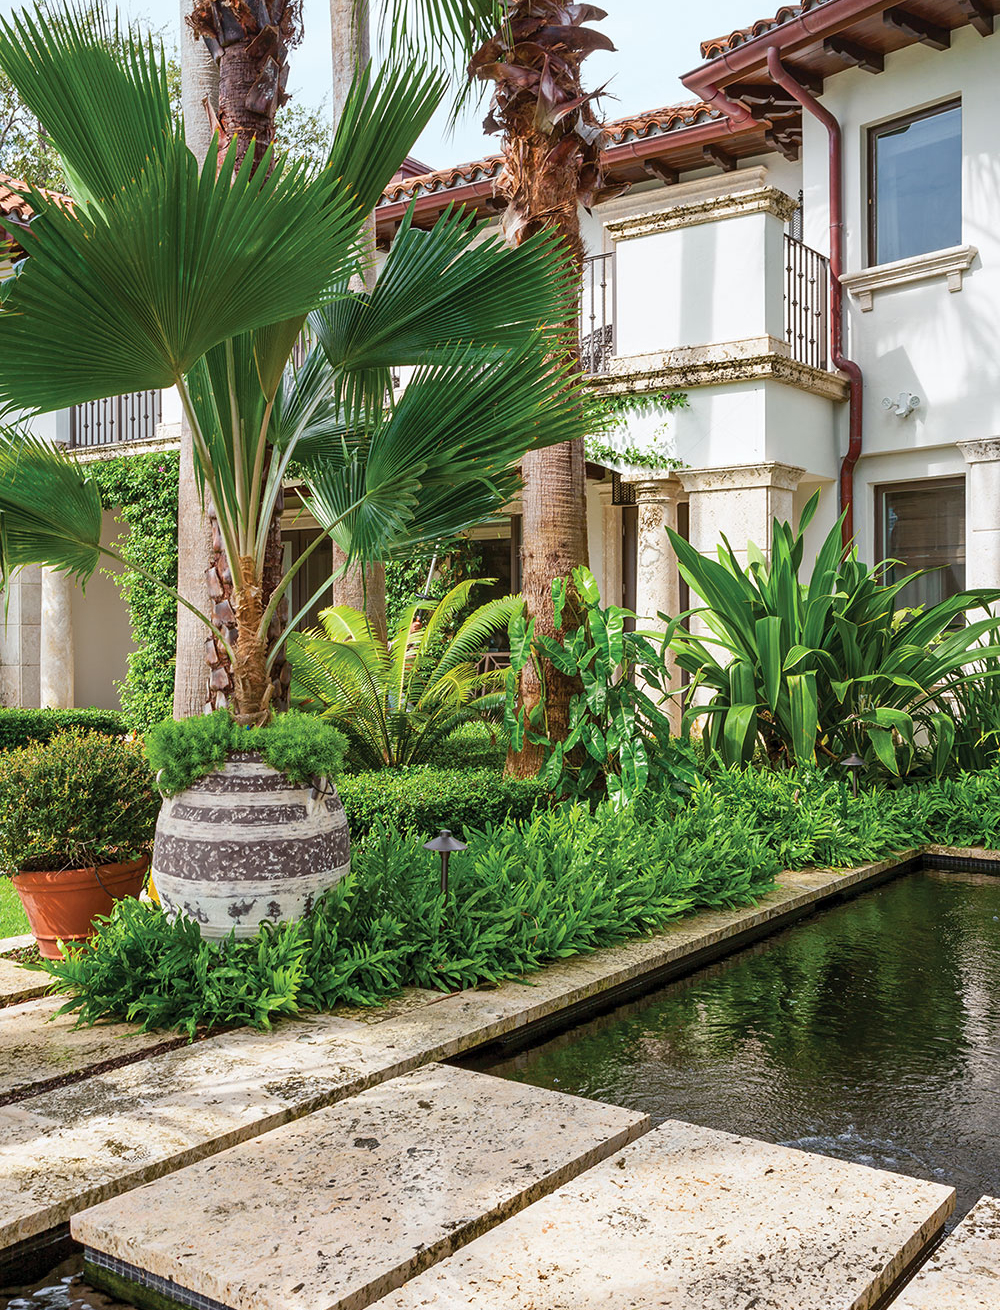 Limestone slabs create a path over ponds that house the owners’ collection of Asagi and Shusui koi. The urns are from Authentic Provence in West Palm Beach.